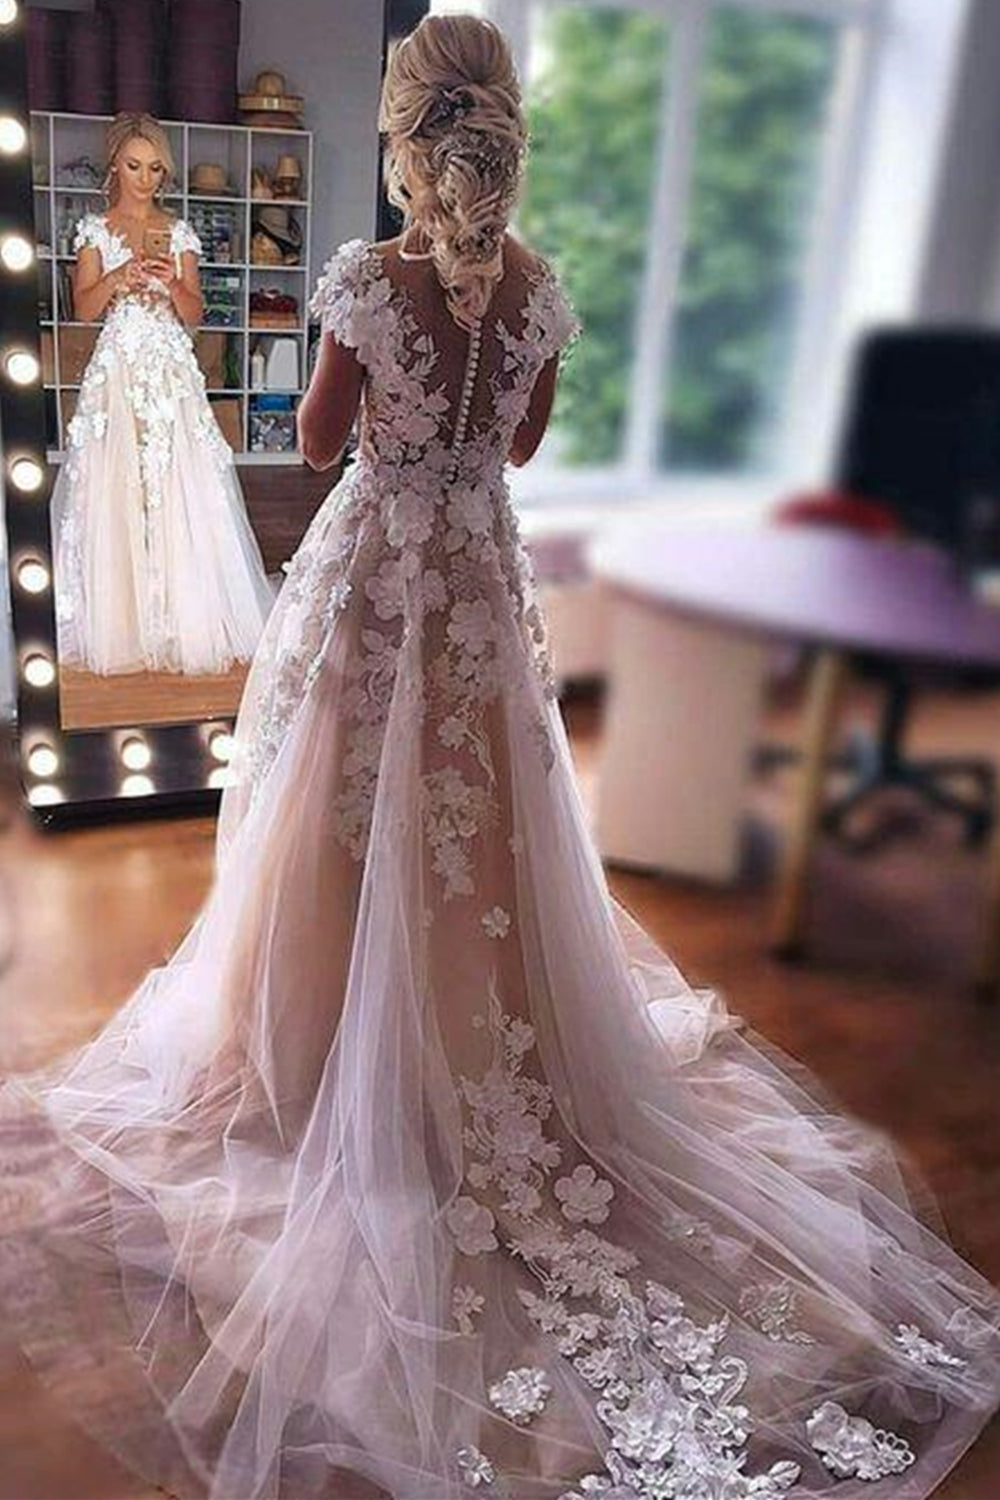 Cap Sleeves Champagne Lace Appliques Prom Wedding Dresses with Train, Champagne Lace Formal Dresses, Champagne Evening Dresses EP1421